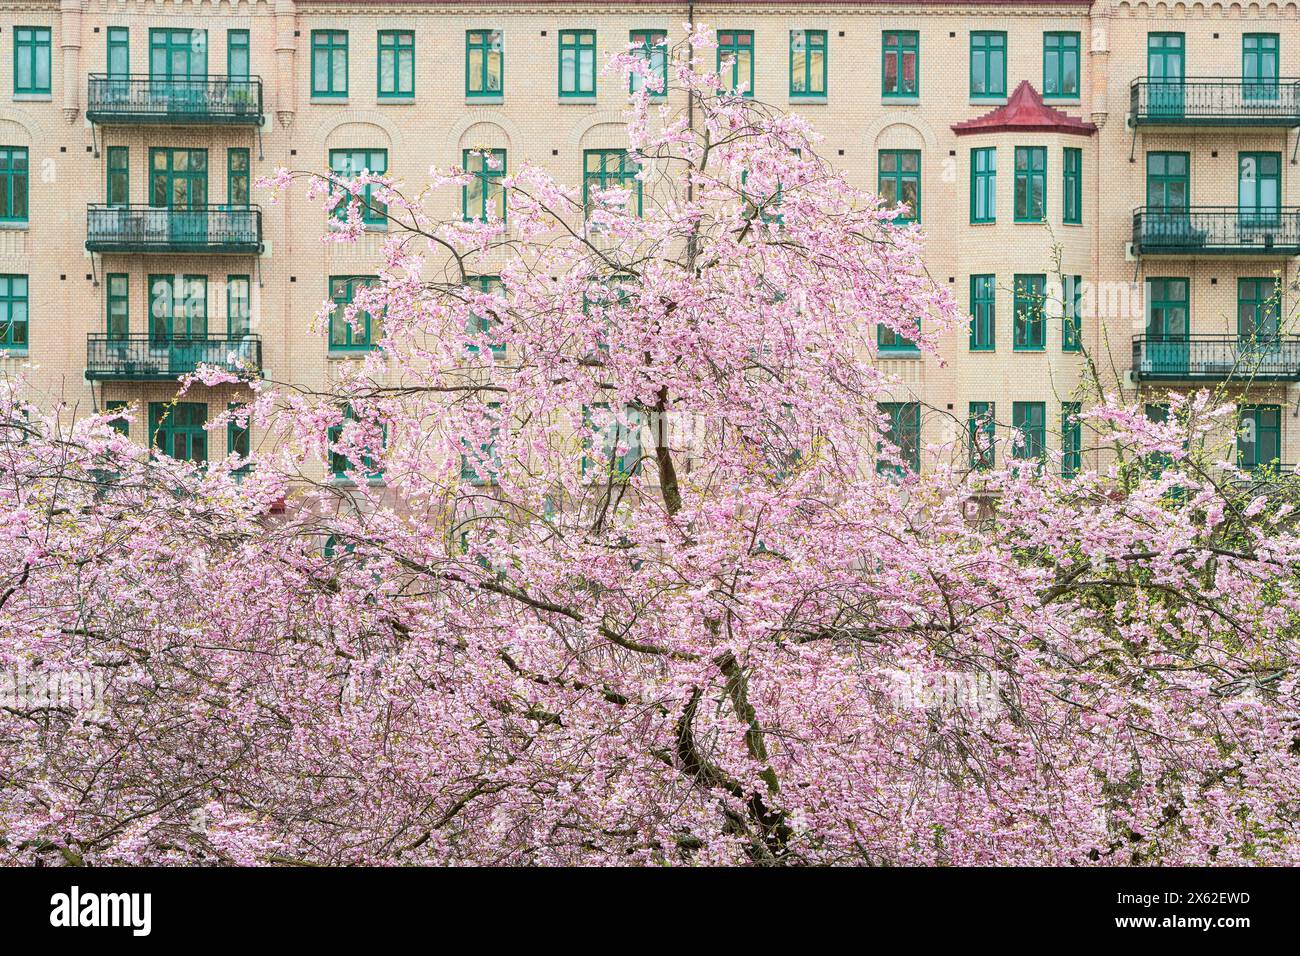 A vibrant cherry blossom tree with pink blossoms stands in front of a building in Gothenburg, Sweden. The tree adds a pop of color to the urban landsc Stock Photo